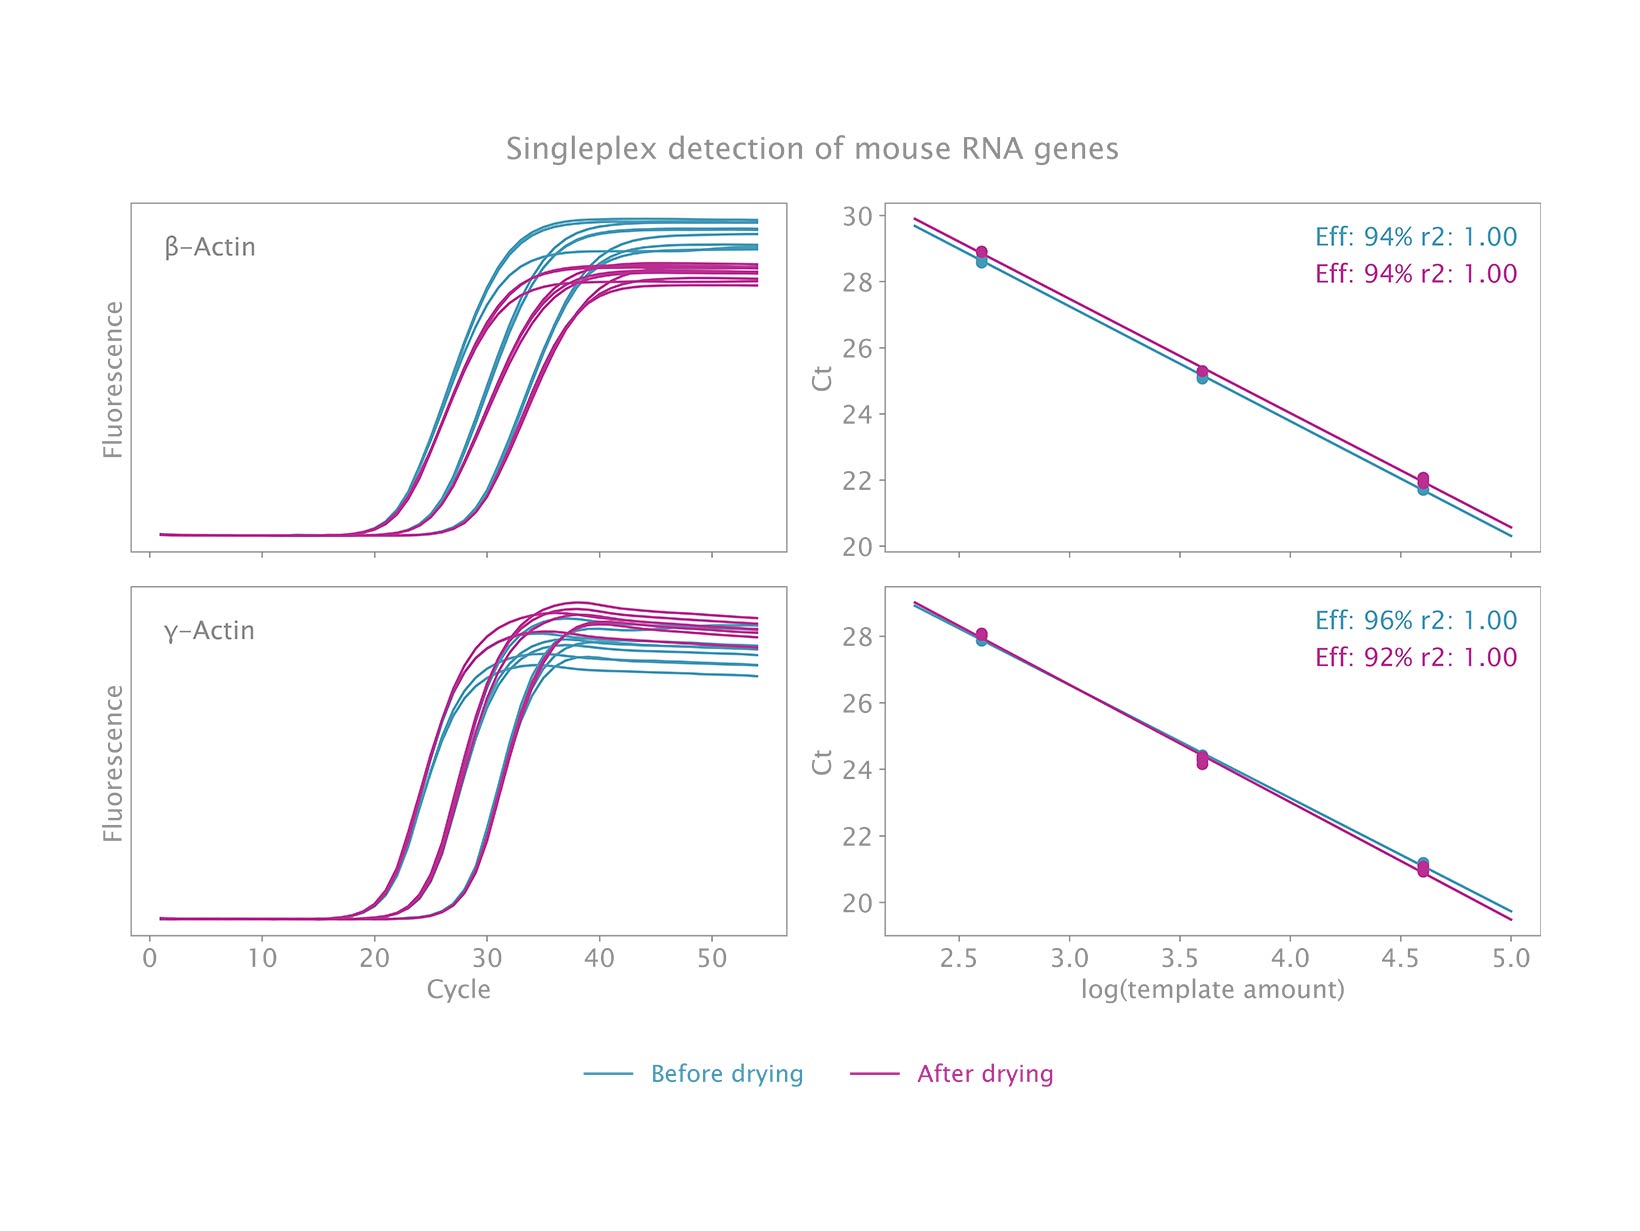 Air-Dryable Probe 1-Step Mix is suitable for singleplex and multiplex qPCR